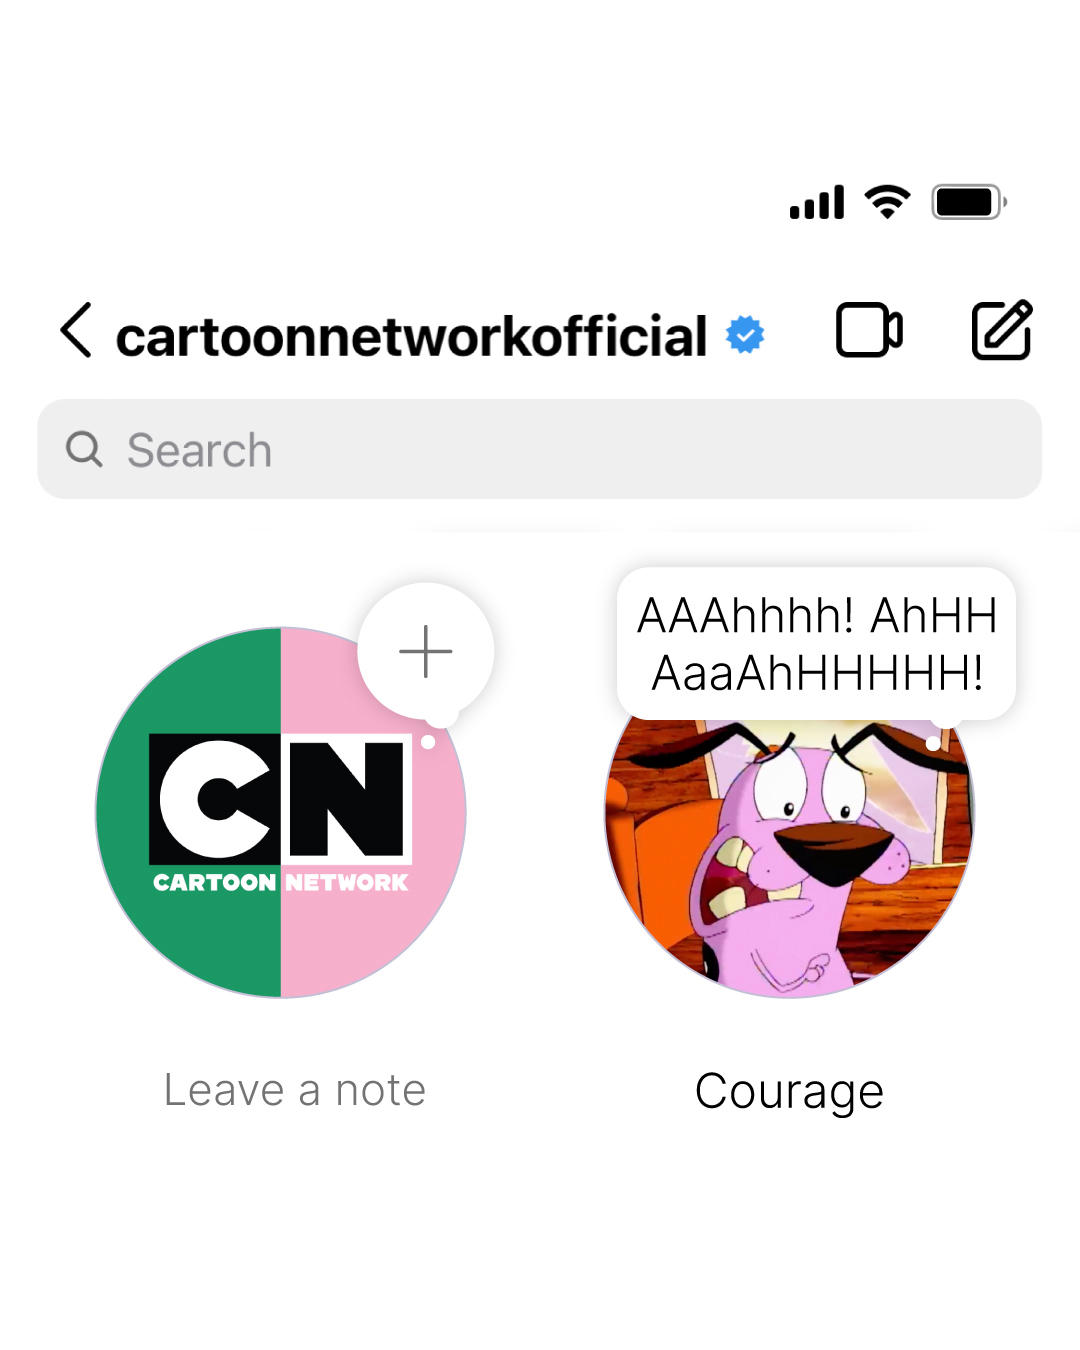 Cartoon Network - Who else has tried IG notes